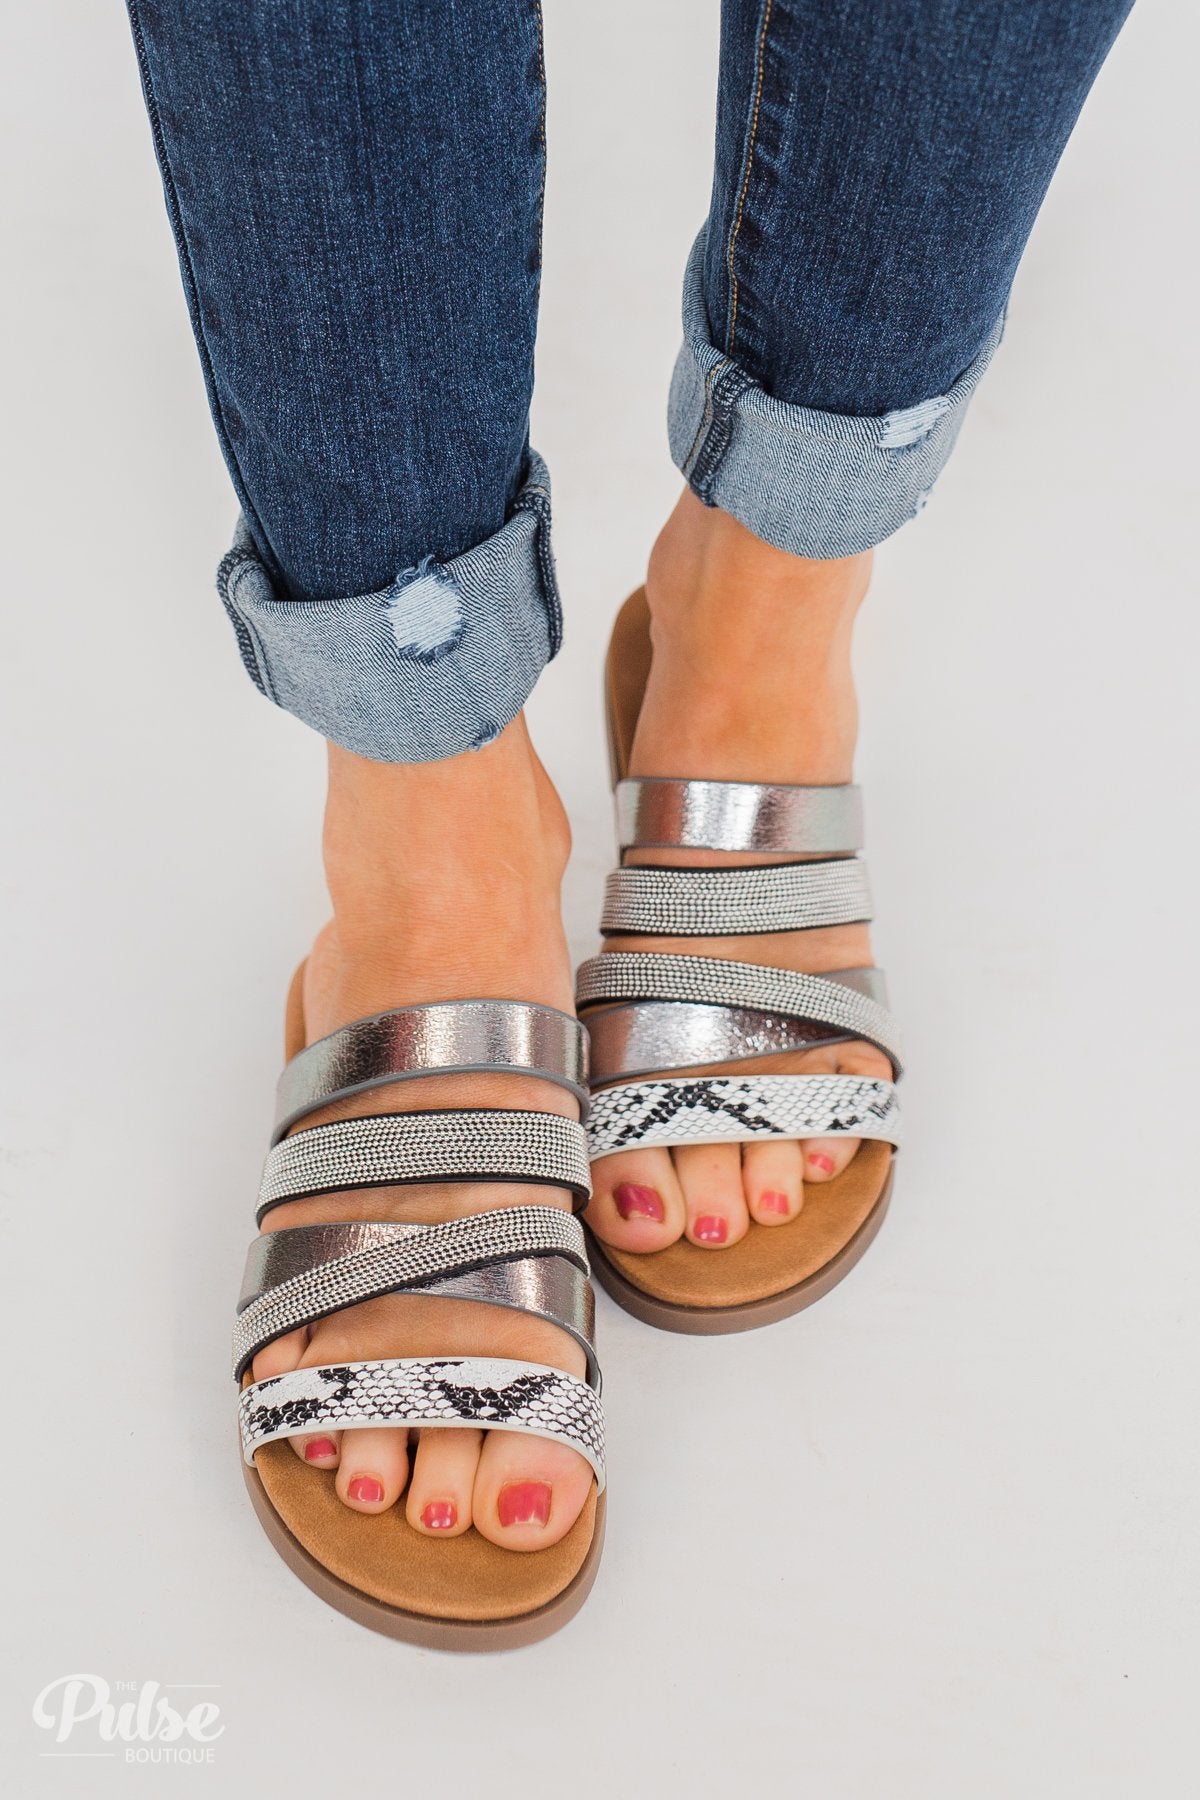 Very G Ginger Sandals- Pewter